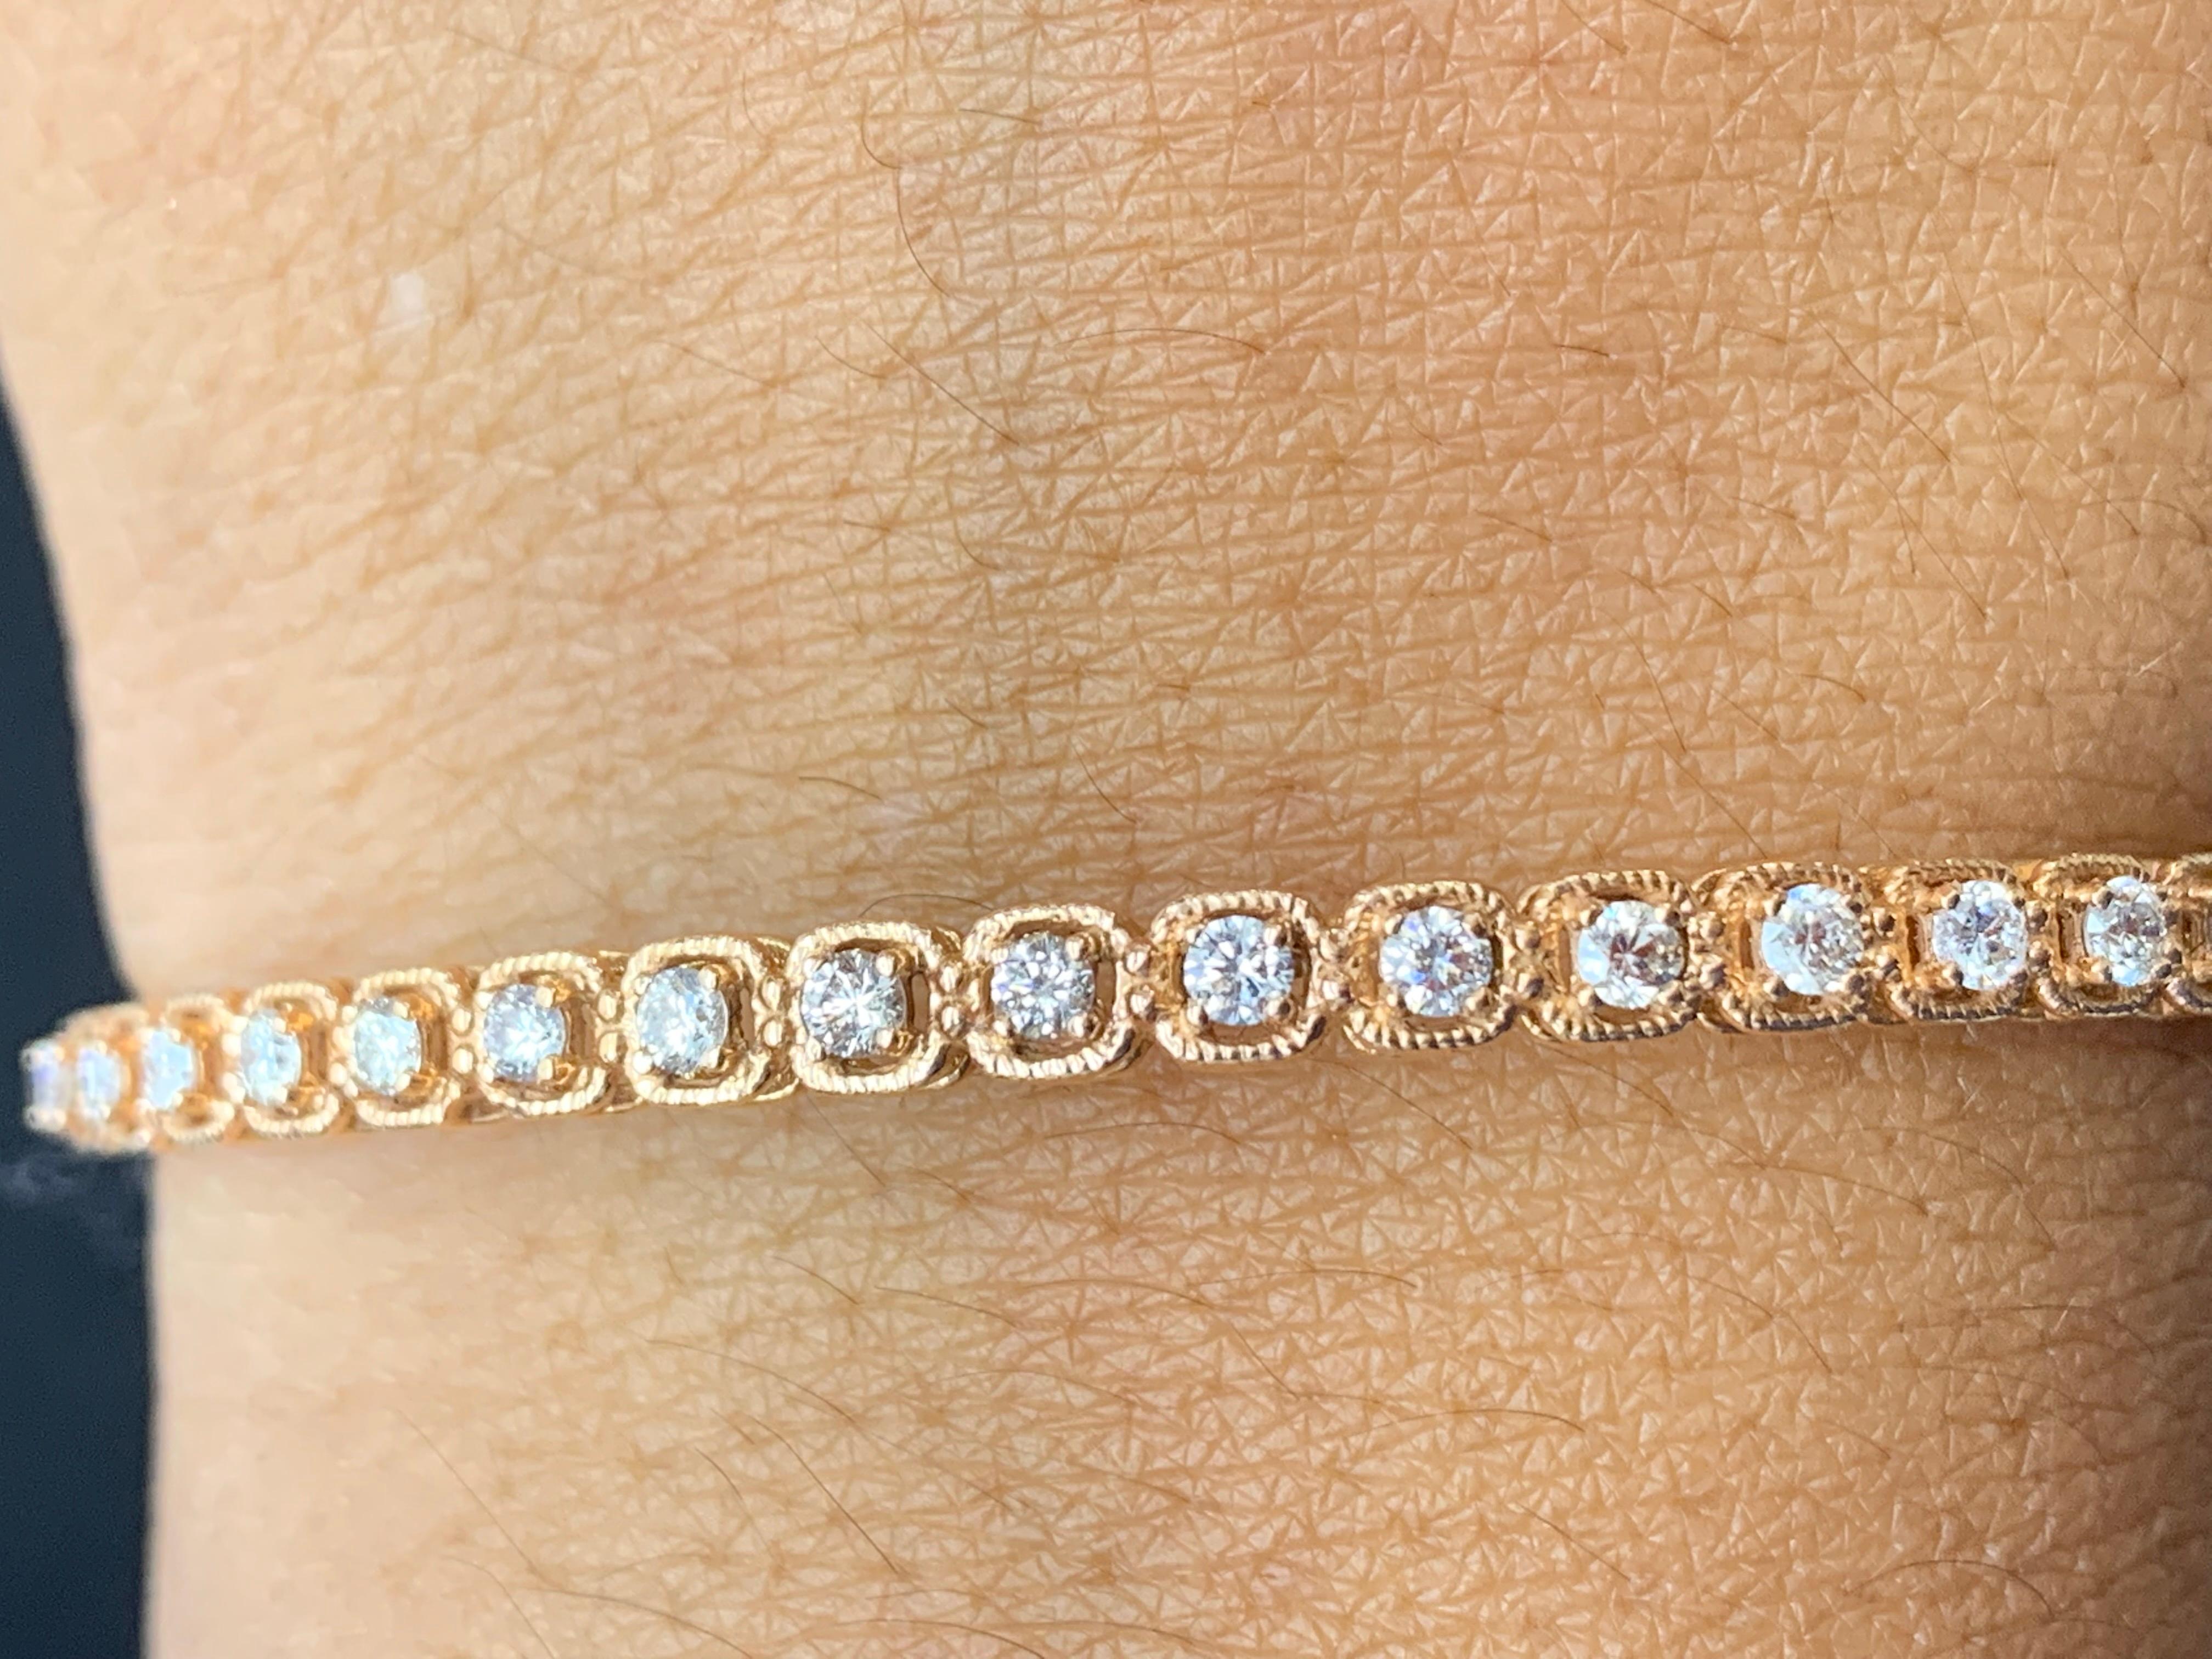 A stunning bangle bracelet set with 23 sparkling round diamonds weighing 0.86 carats total. Diamonds are set in rope design polished 14k rose gold. Double lock mechanism for maximum security. A simple yet dazzling piece.